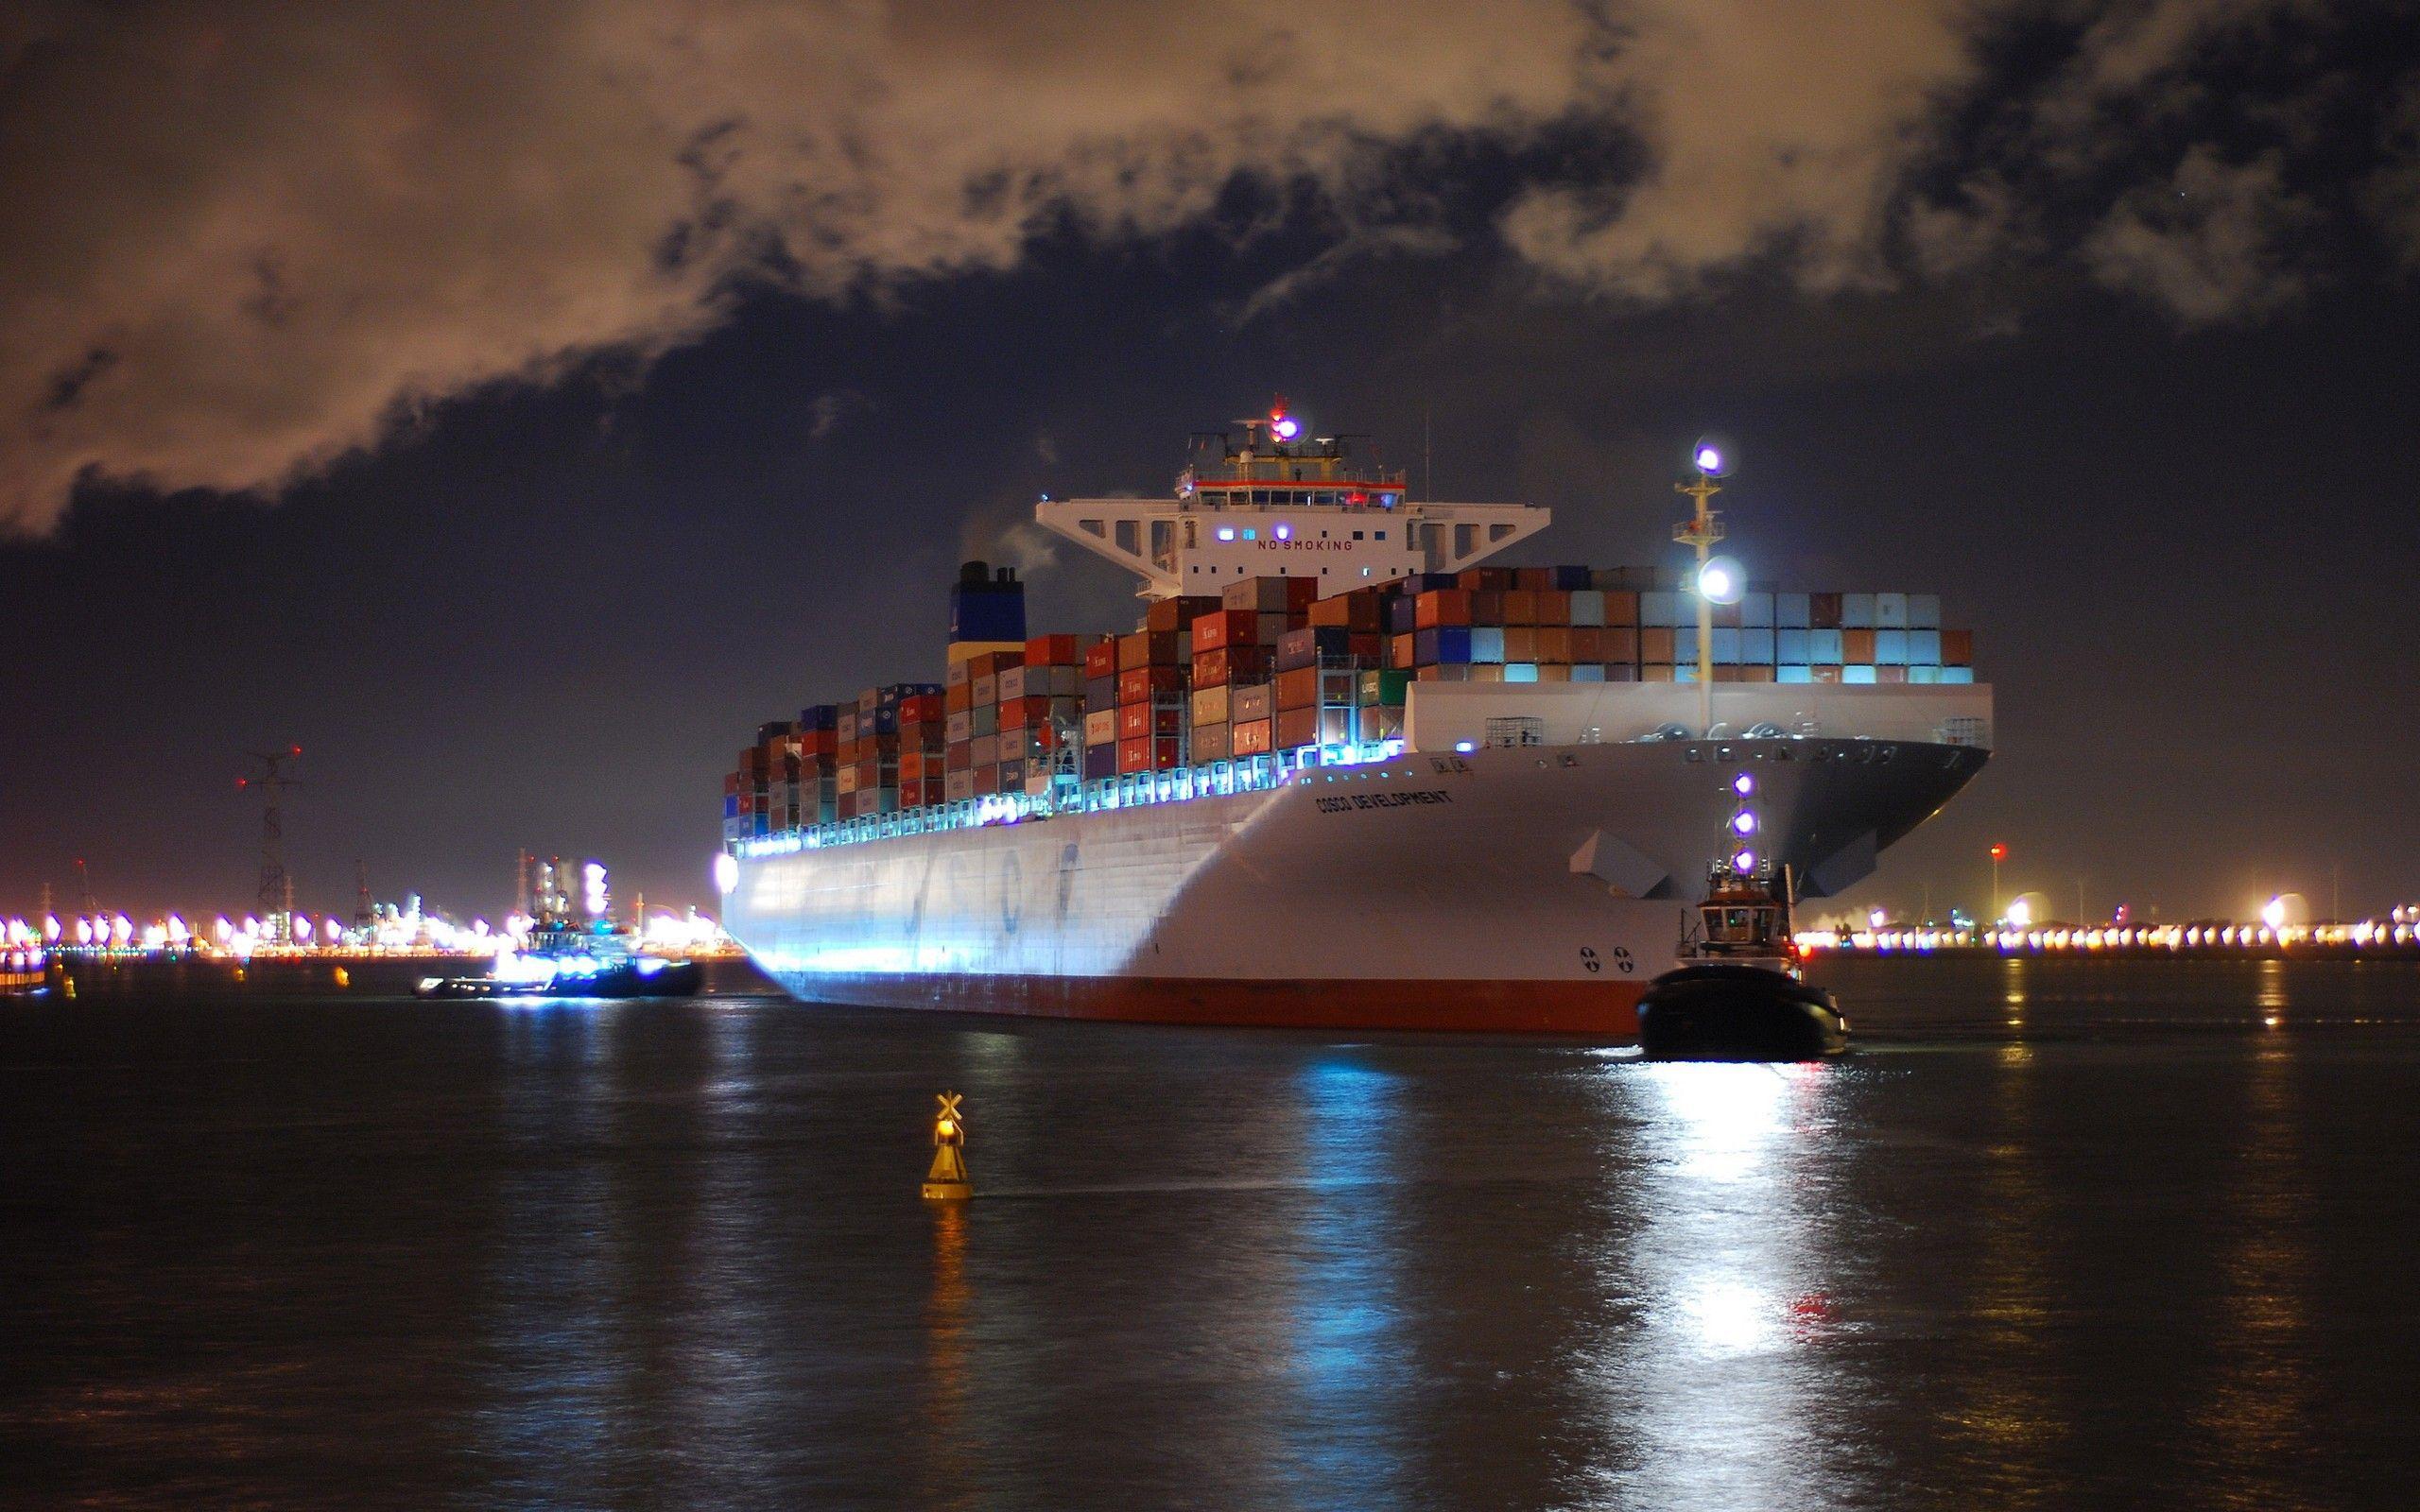 Cosco Container ship in the port wallpaper and image